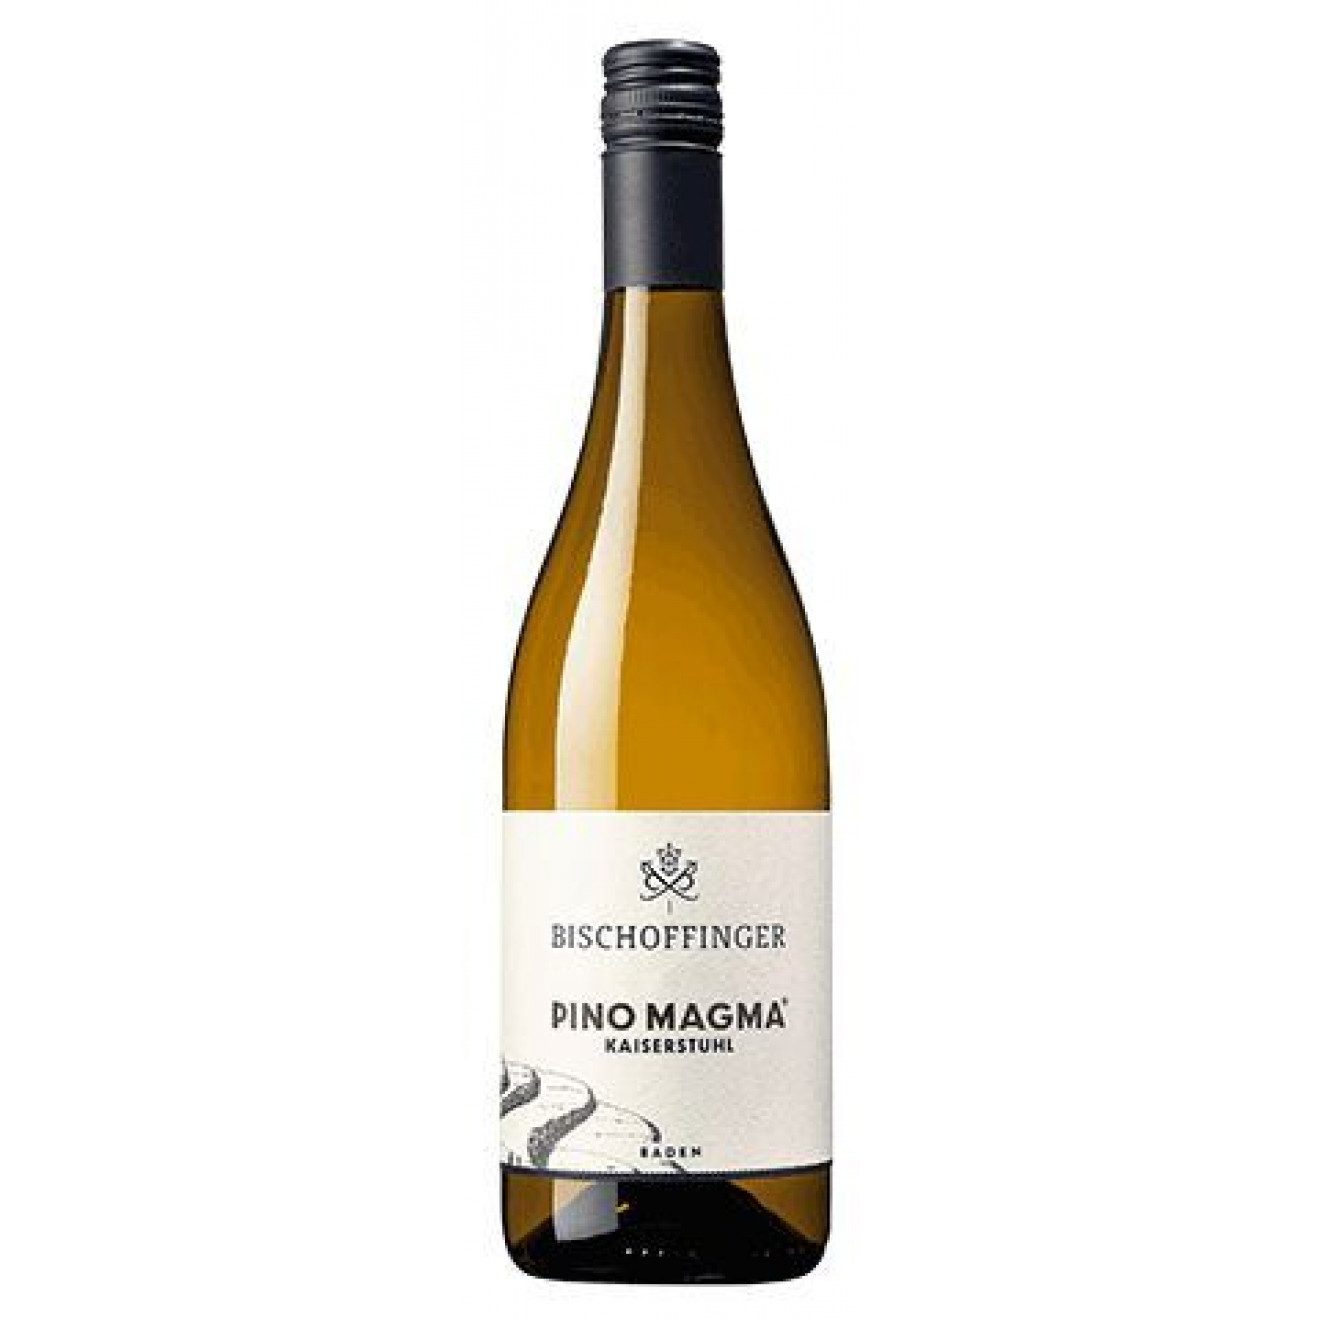 Bischoffinger PINO MAGMA 2020 0,75l